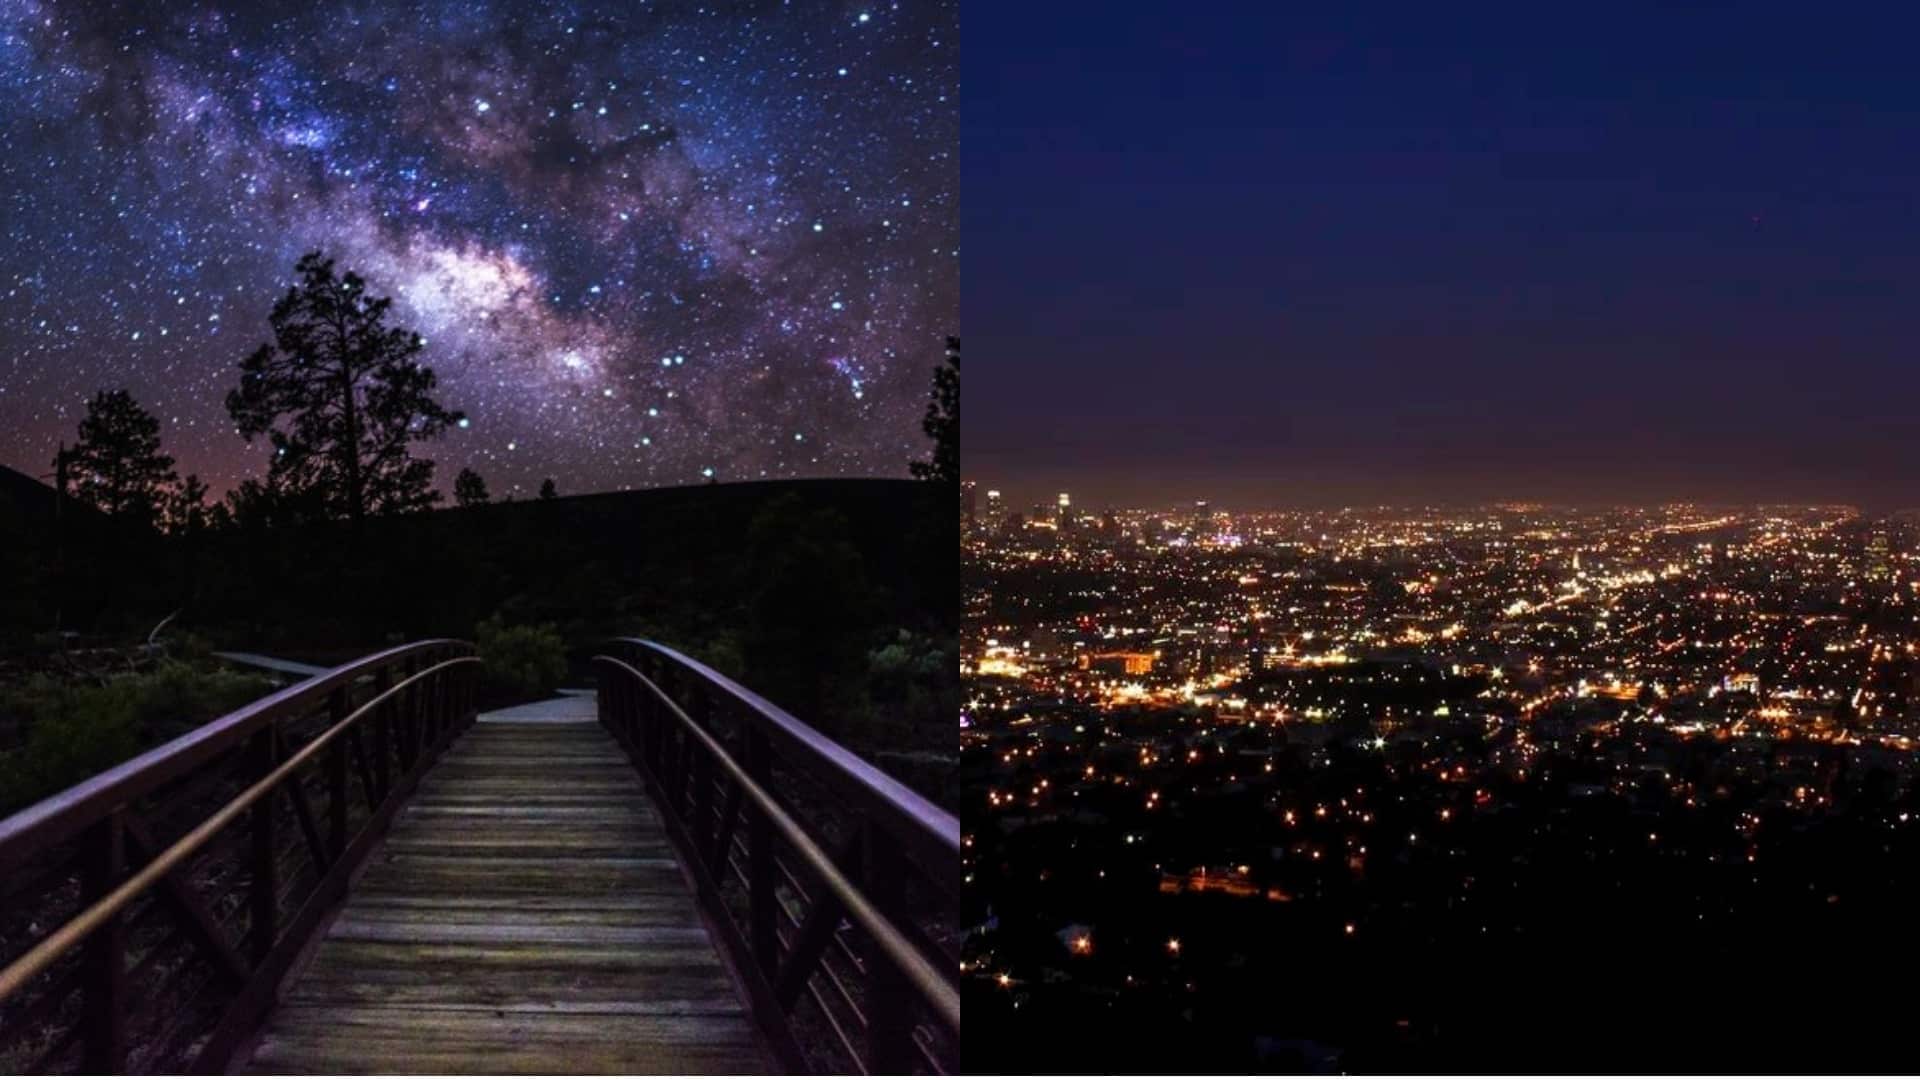 Two sky vistas. A starry night in a dark place and a black night over a lit city.